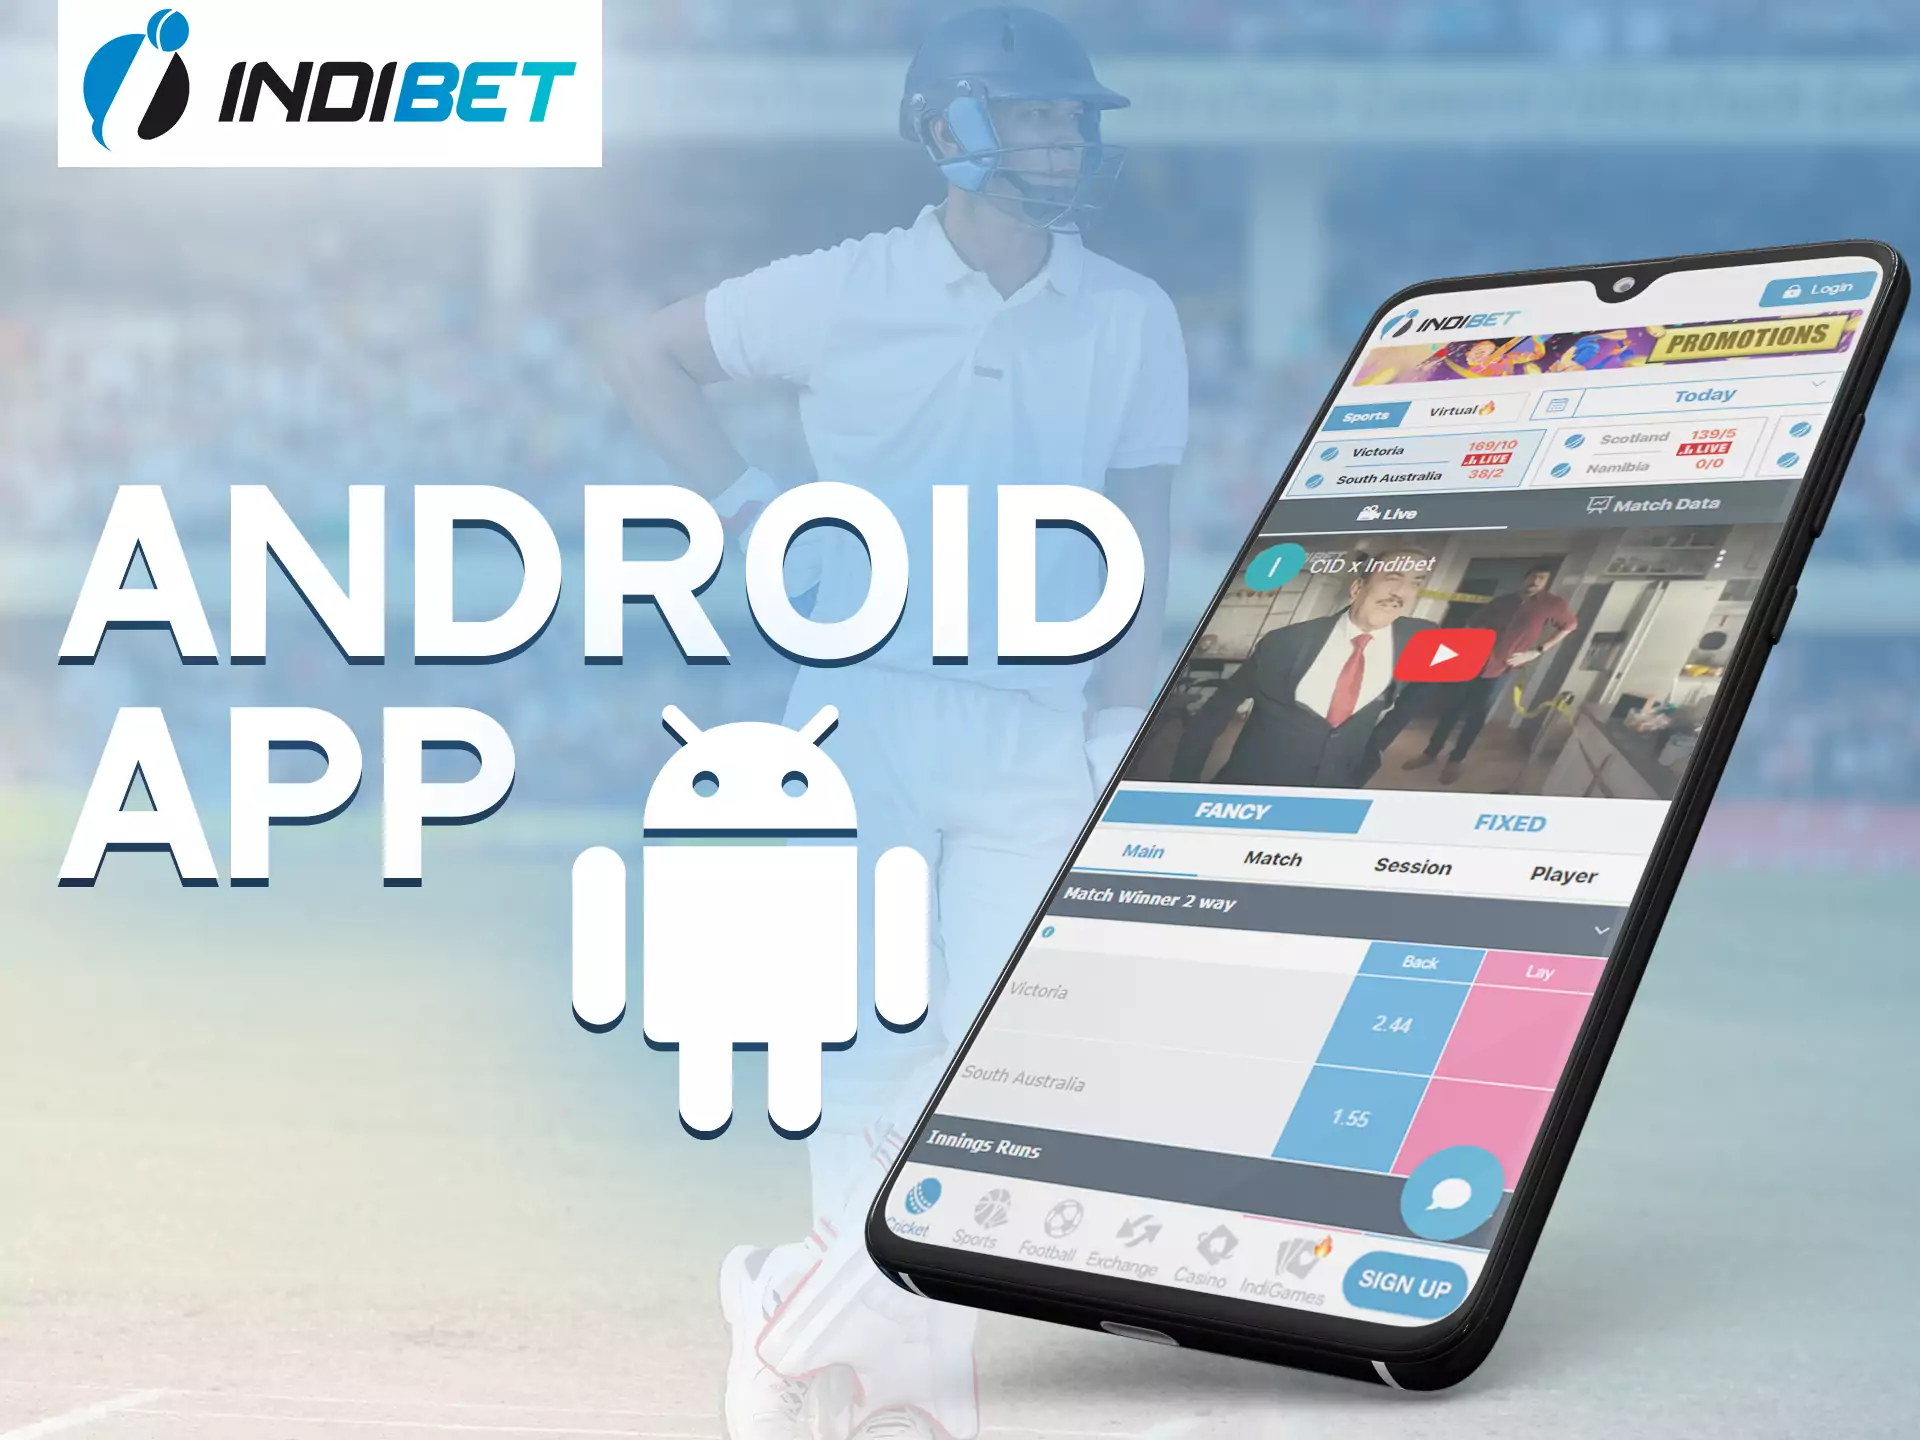 Use Indibet Android app on your device.